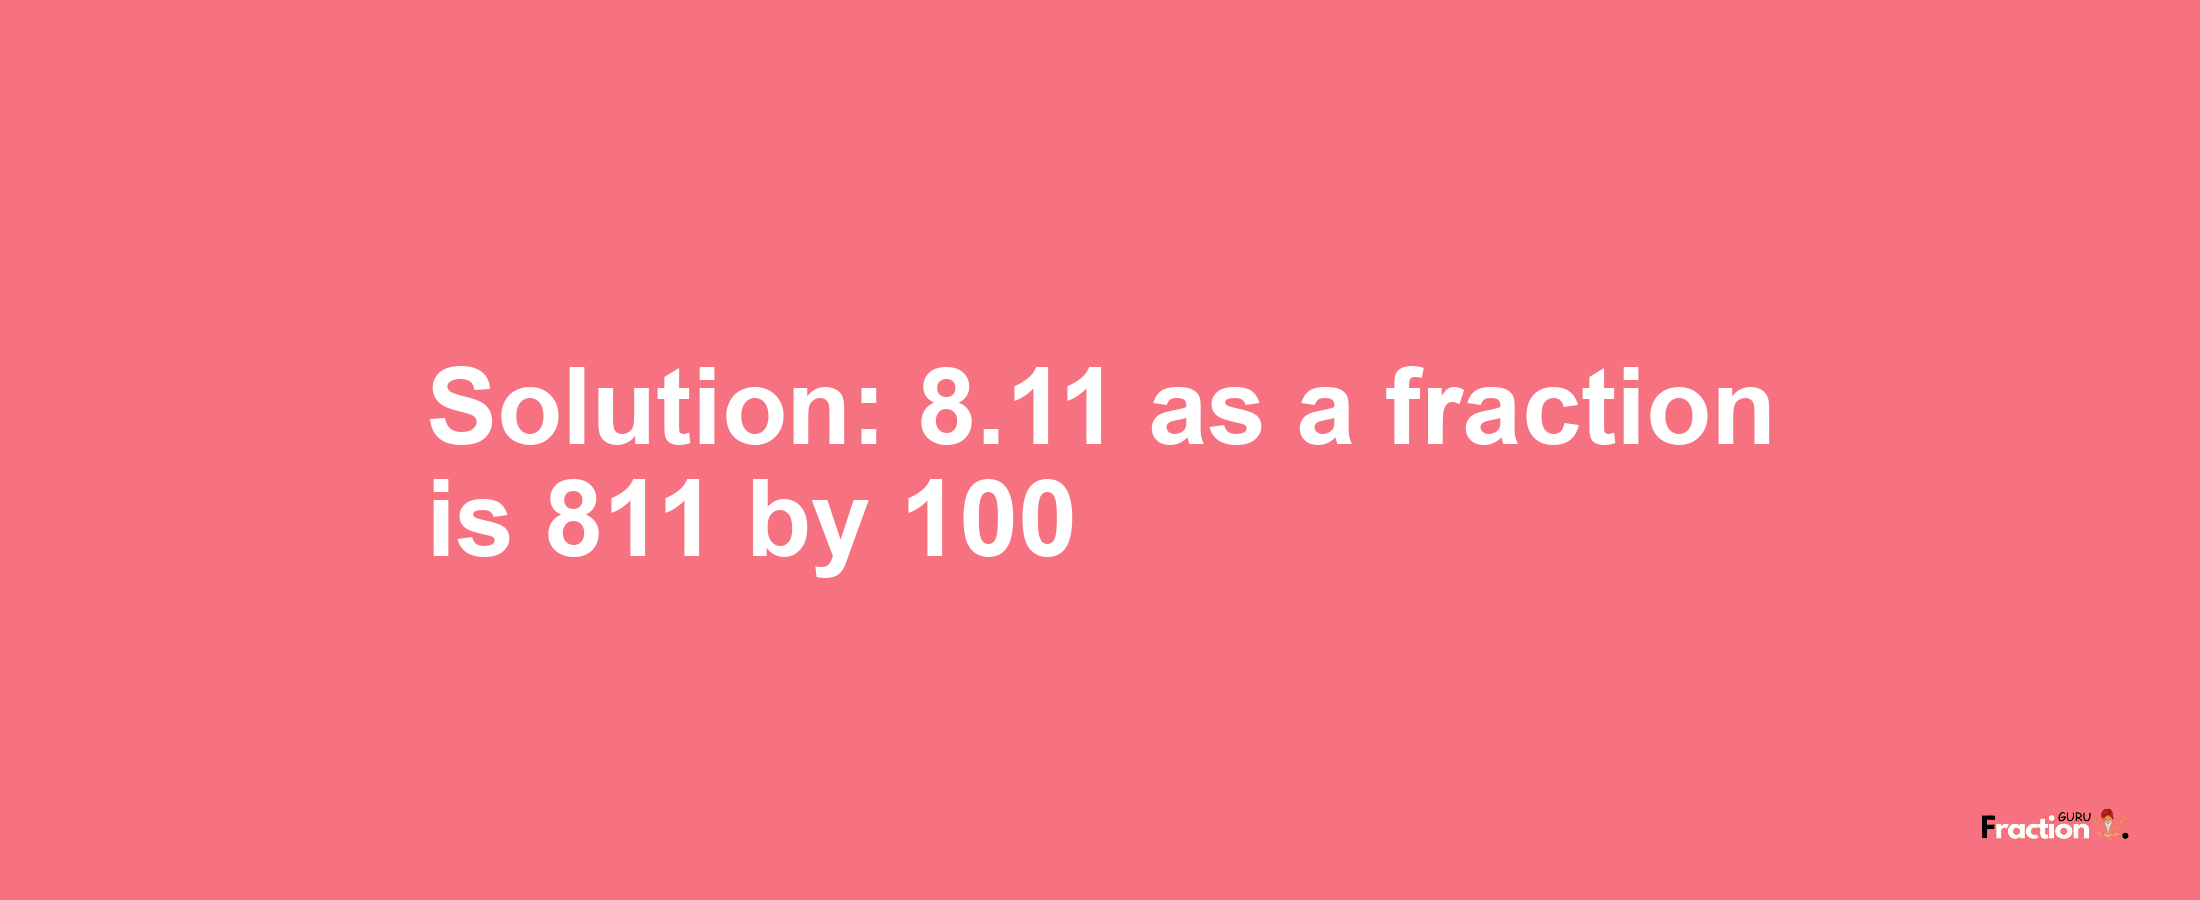 Solution:8.11 as a fraction is 811/100